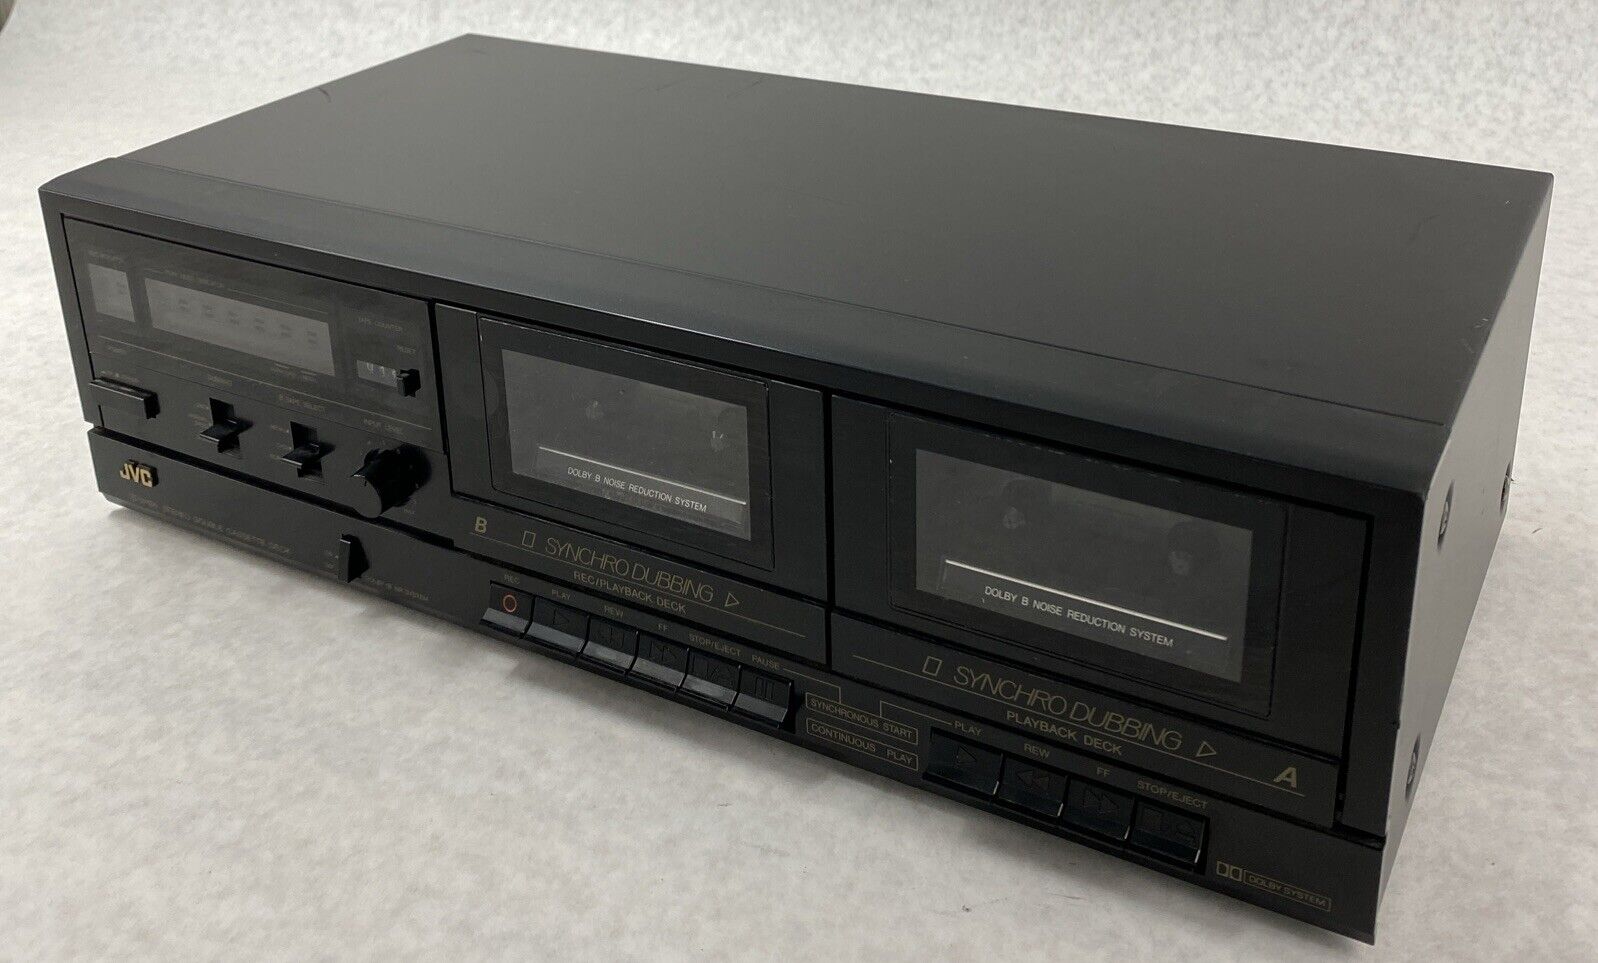 JVC TD-W106 Stereo Double 2 Cassette Tape Deck Player Recorder BAD REWIND